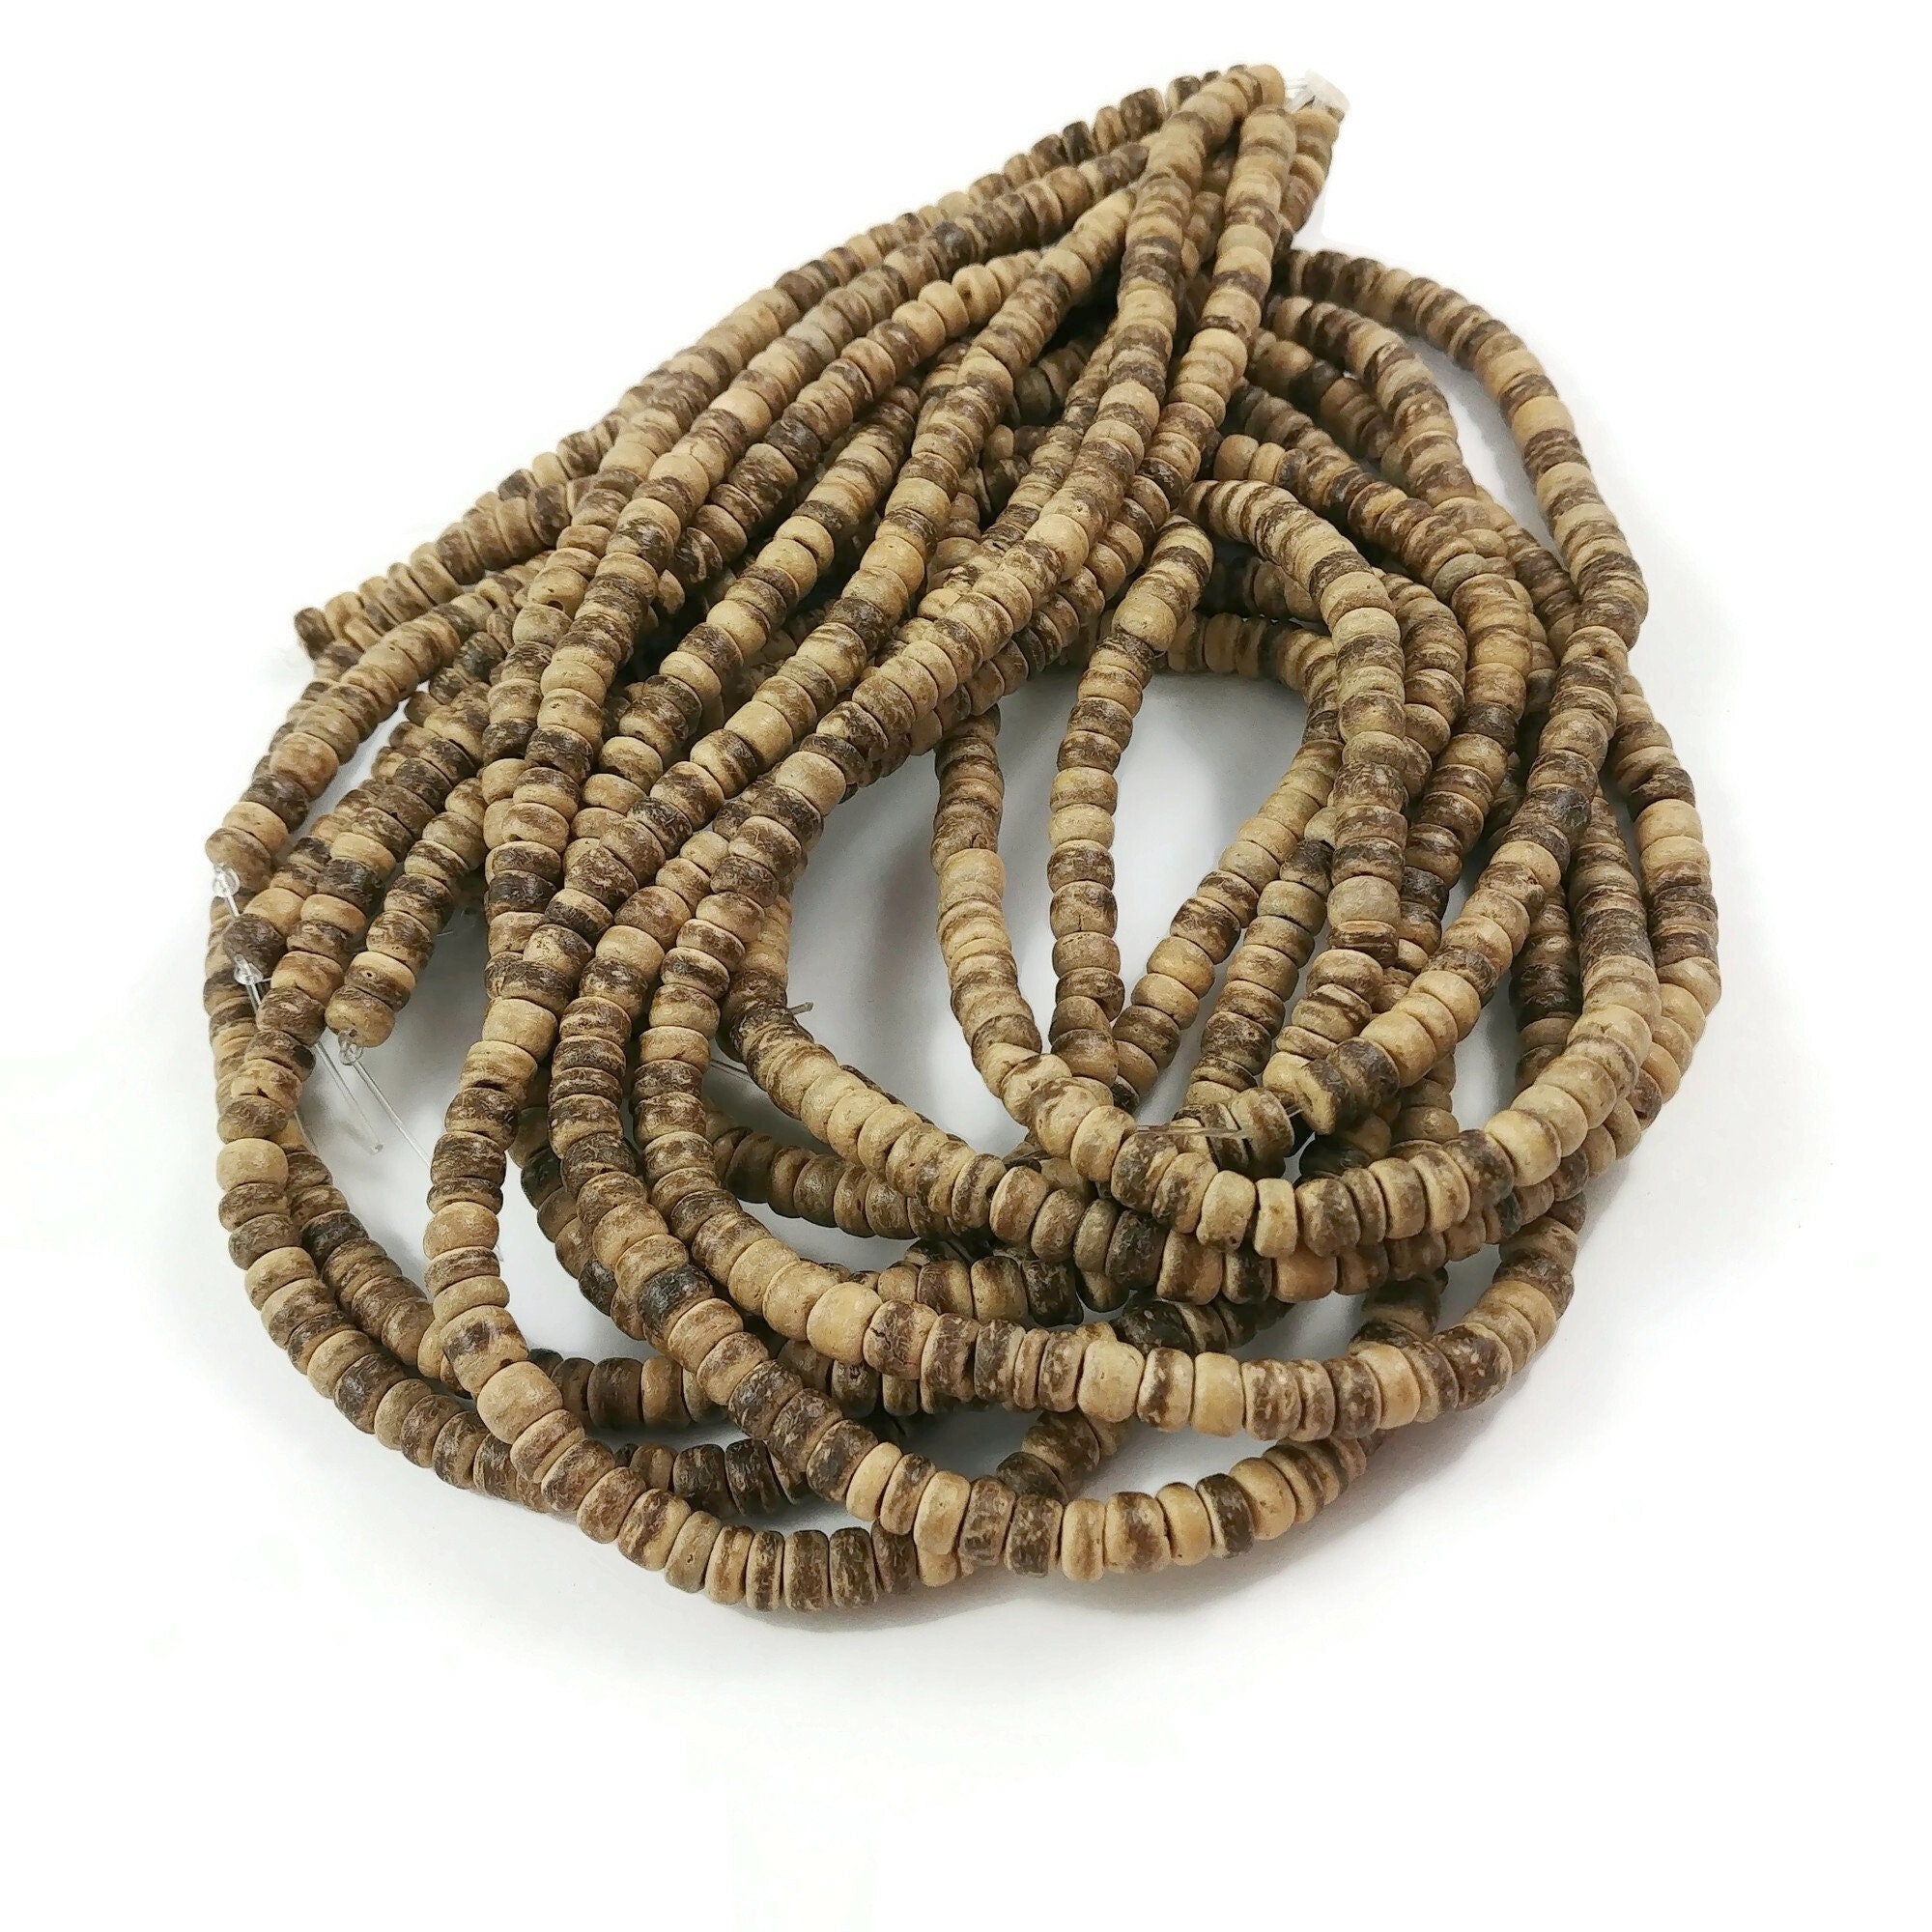 125 natural coconut wood beads, 5mm rondelle heishi beads, Jewelry making spacers